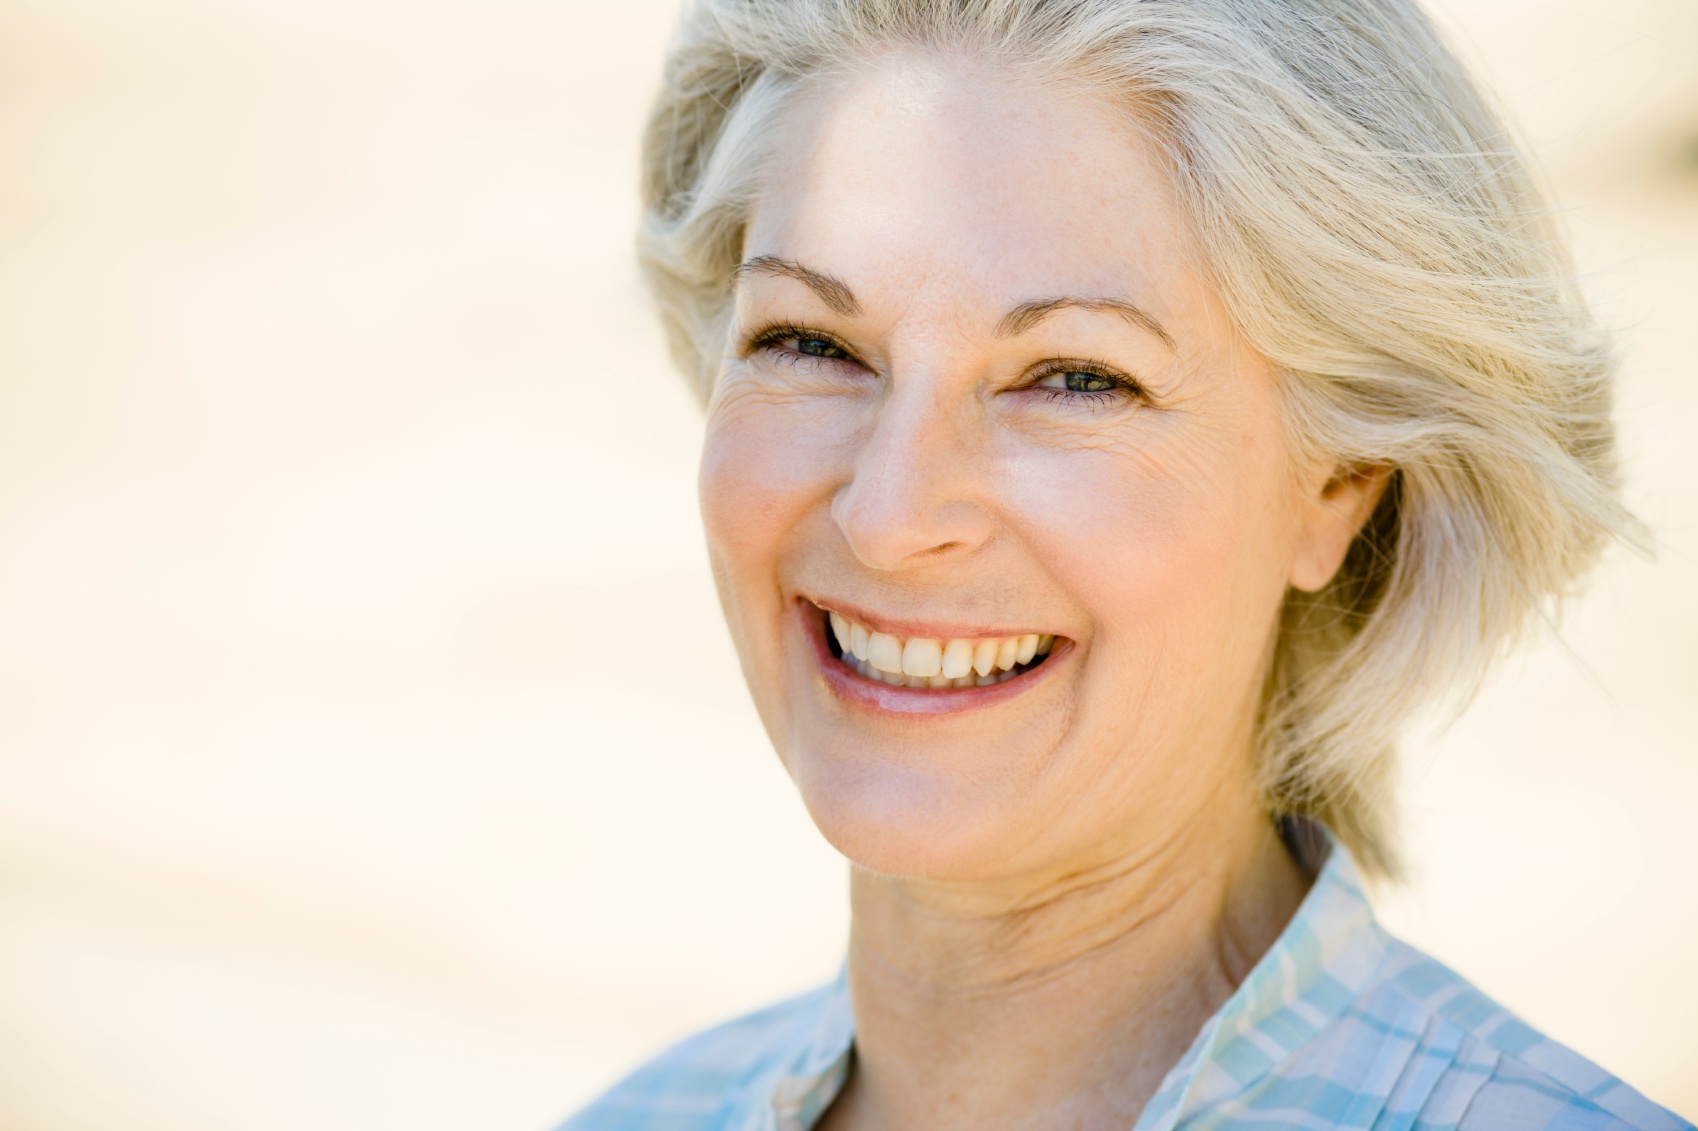 Laser Skin Treatments for Age Spots